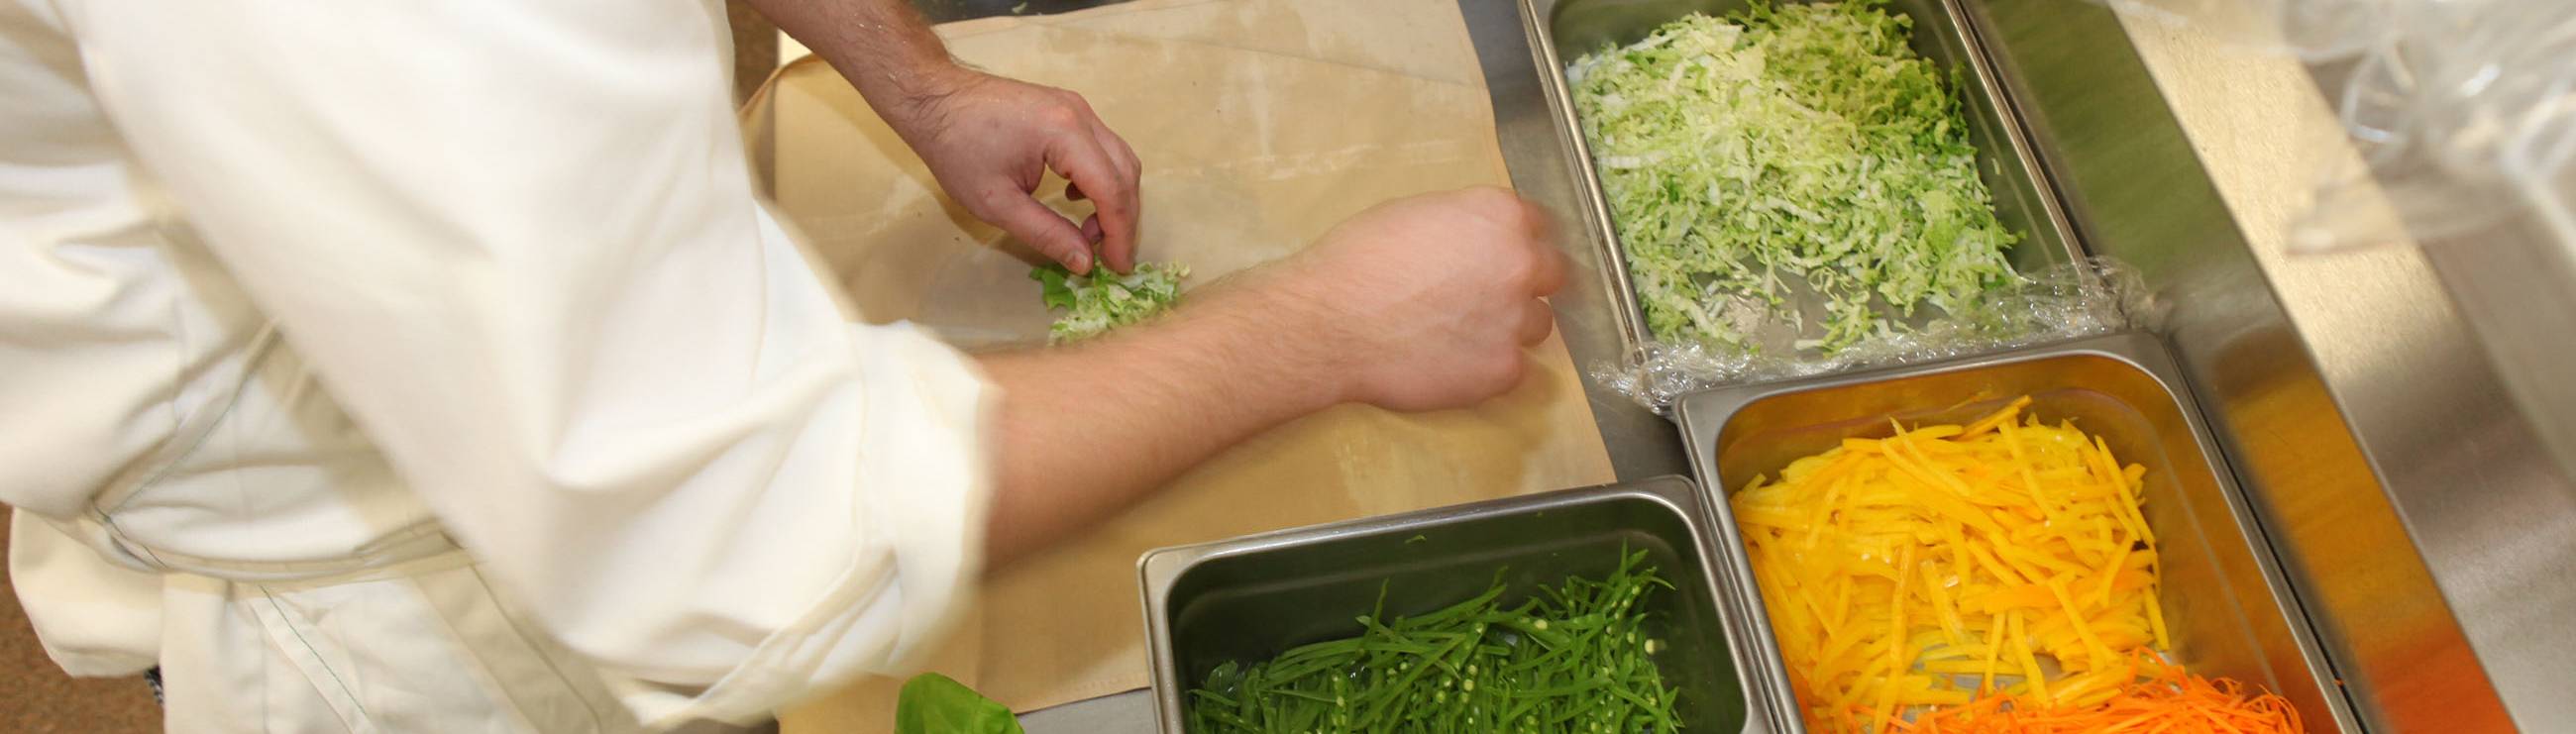 Student preparing a meal 